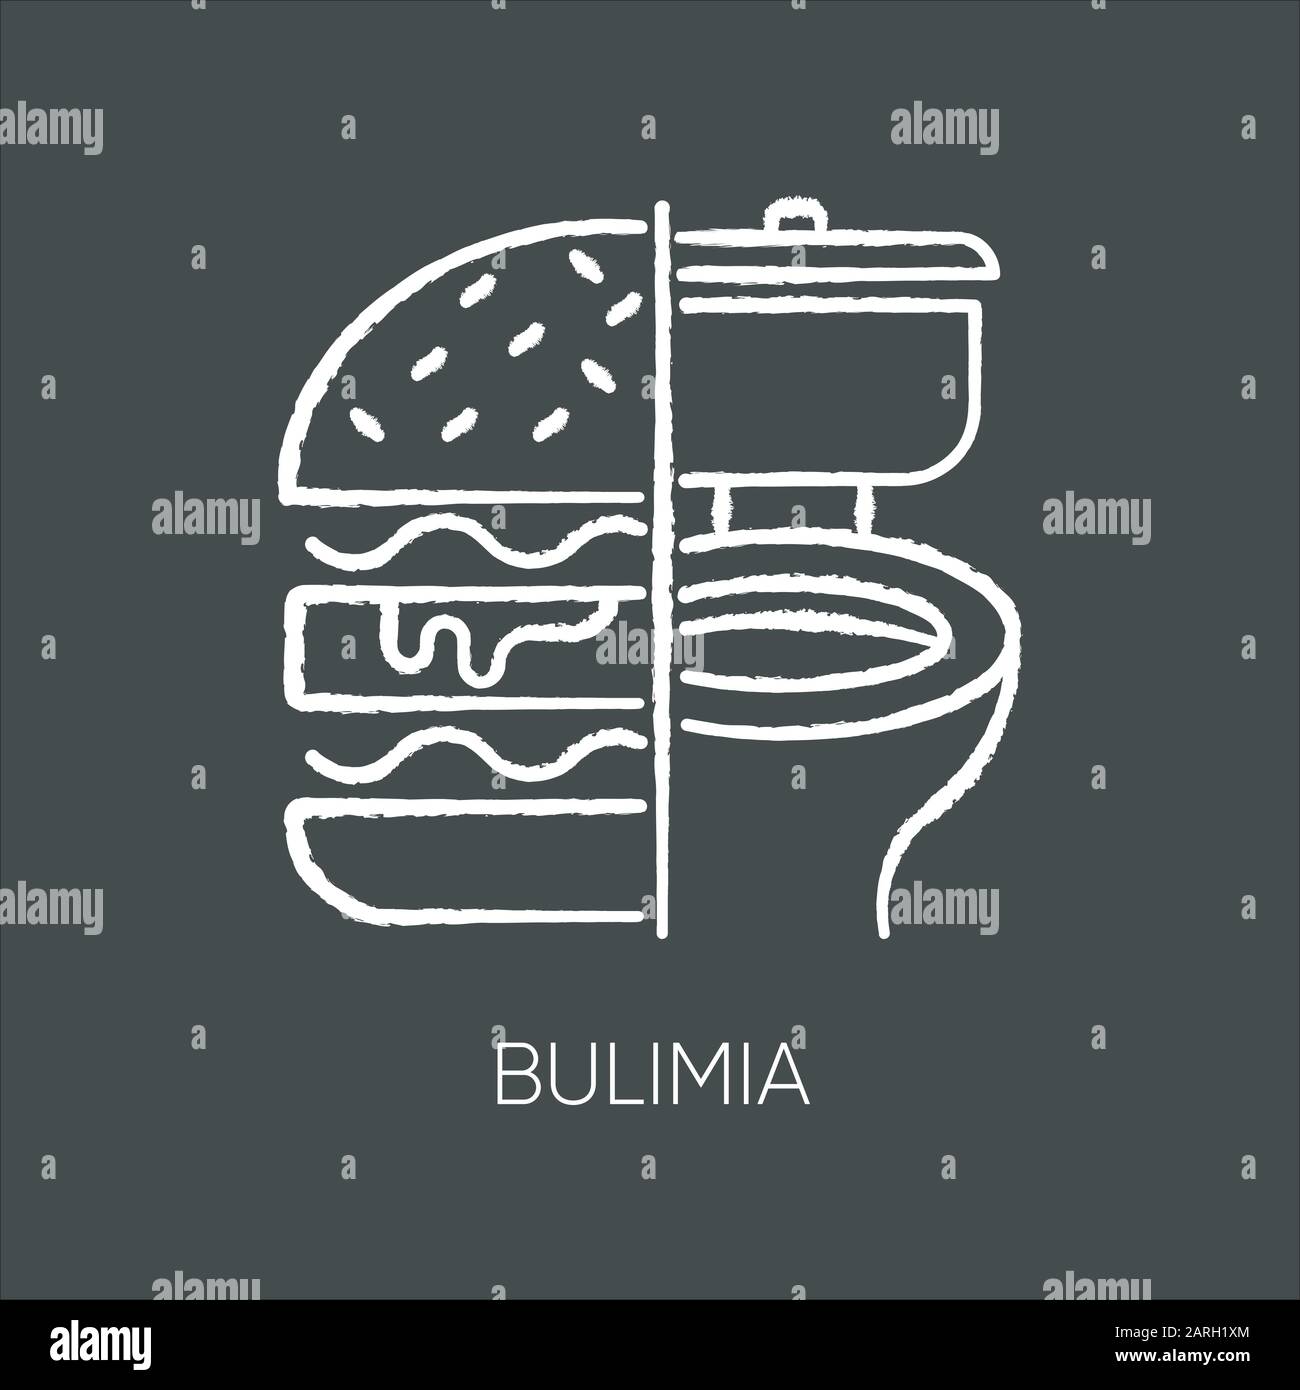 Bulimia chalk icon. Eating disorder. Depression and anxiety. Vomiting food in bathroom. Unhealthy hunger. Binge eating from stress. Mental disorder. I Stock Vector